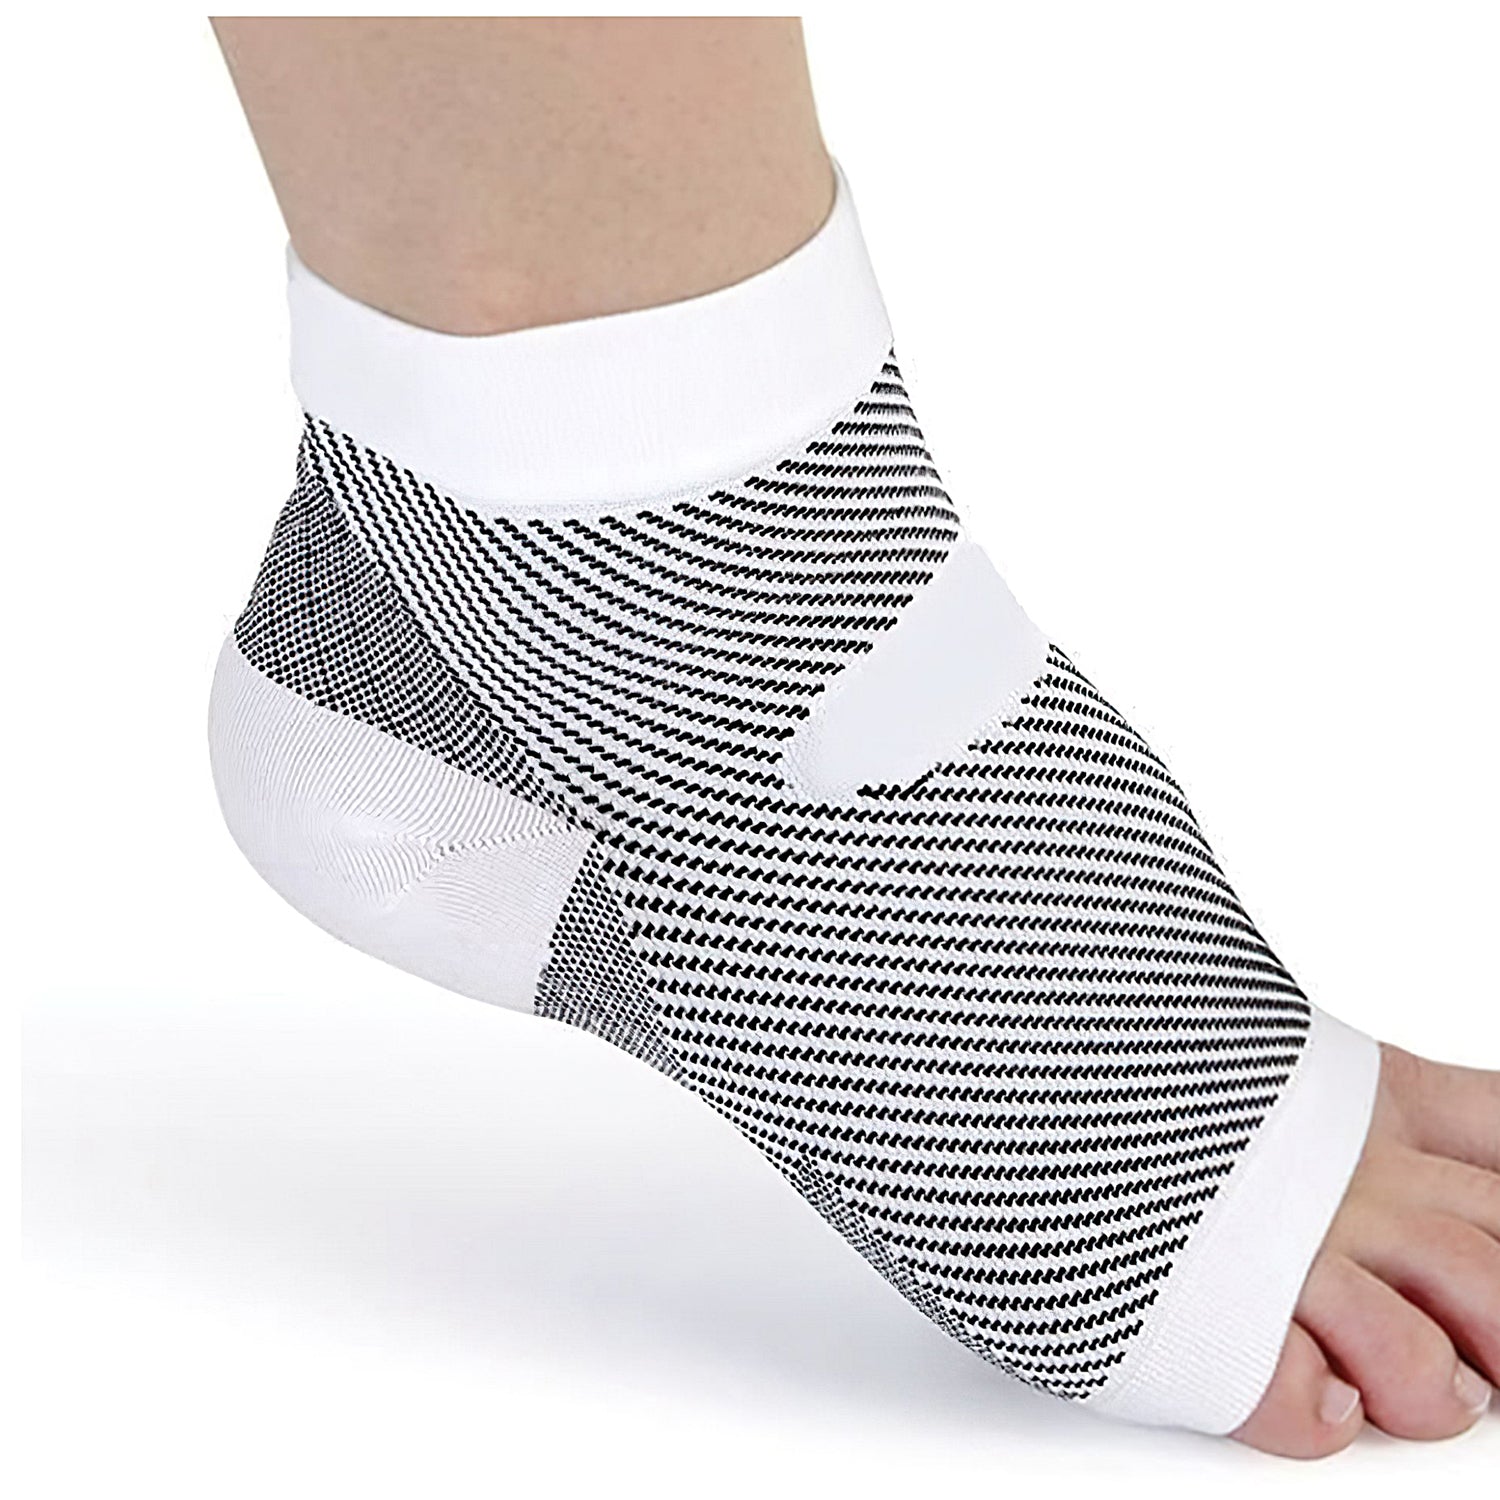 Importikaah Cotton Alignment Socks with 5 Toe Separator - Foot Pain  ReliefImportikaah Cotton Alignment Socks - 5 Toe Separator for Foot Pain  Relief